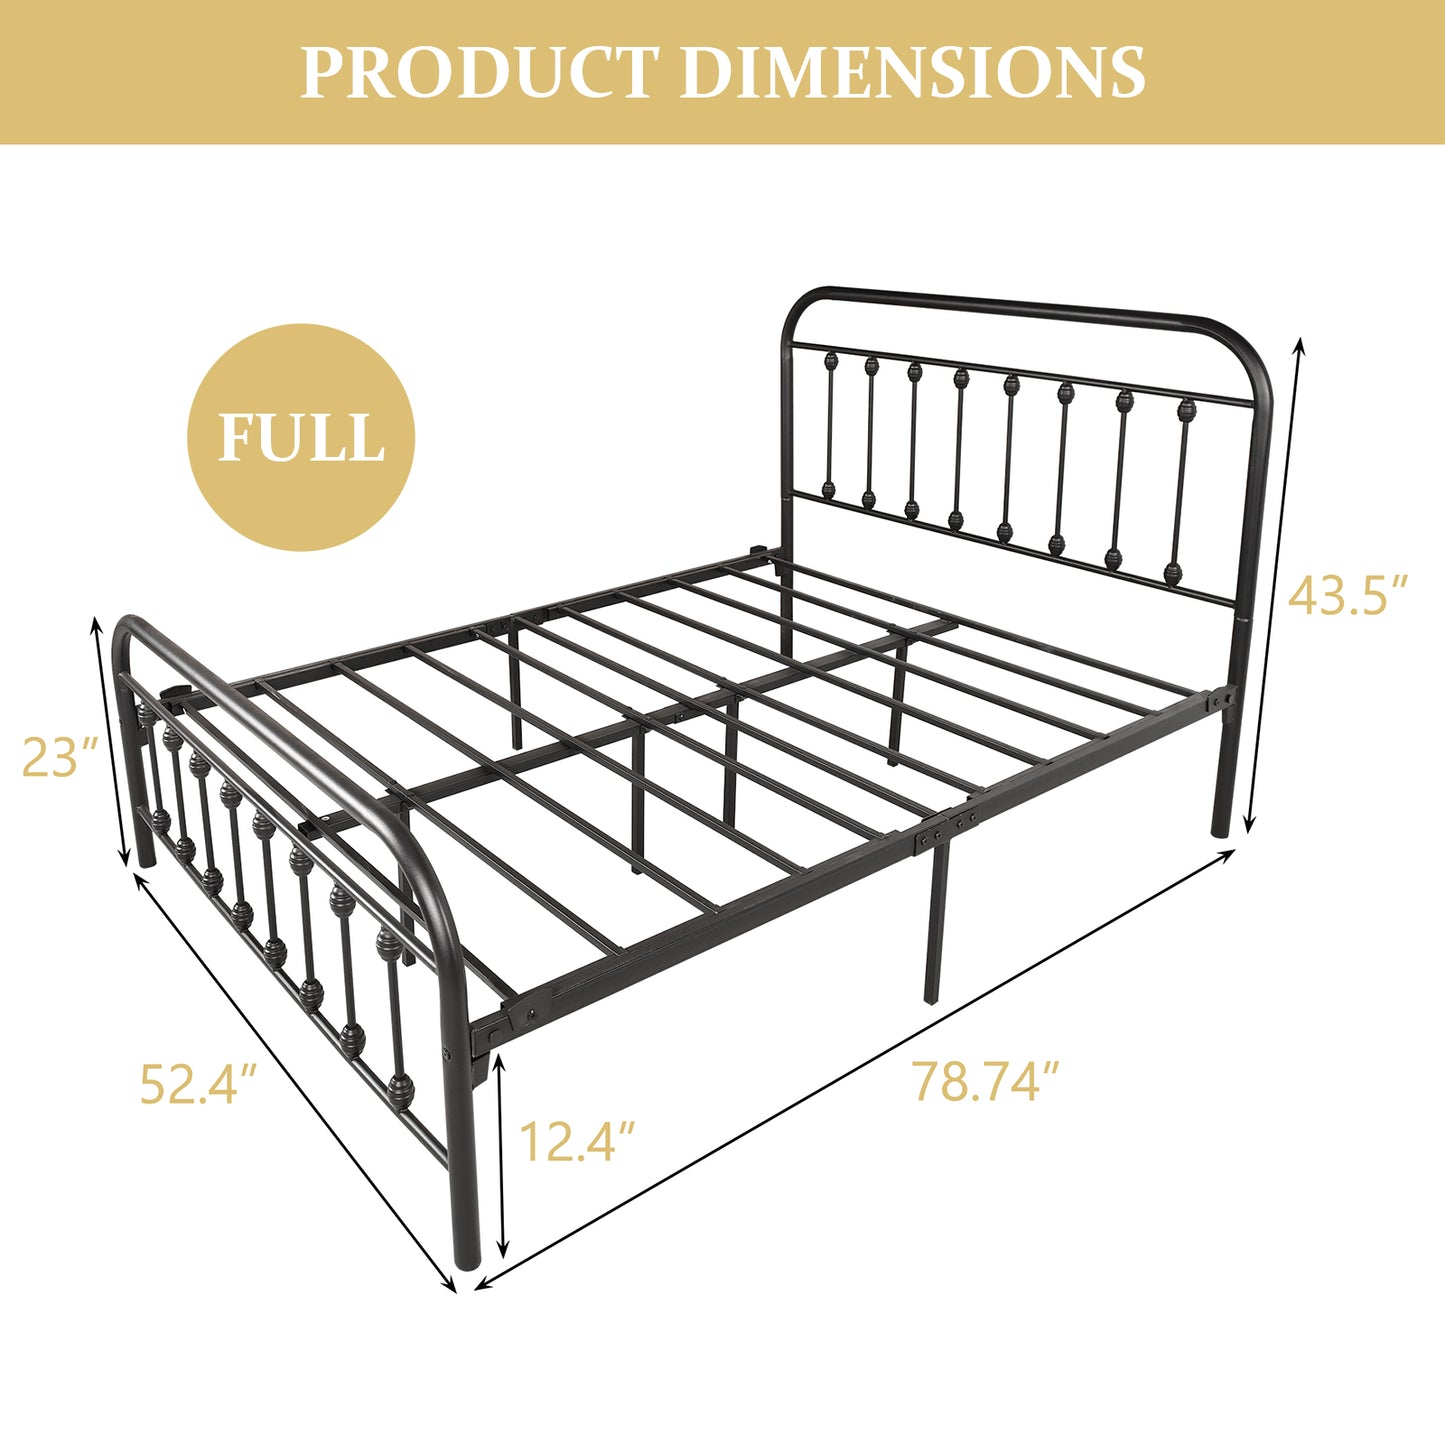 paproos Full Size Platform Steel Bed Frame, Full Size Bed Mattress Foundation Support with Vintage Headboard and Footboard, Black Iron-Art Platform Bed, No Box Spring Need